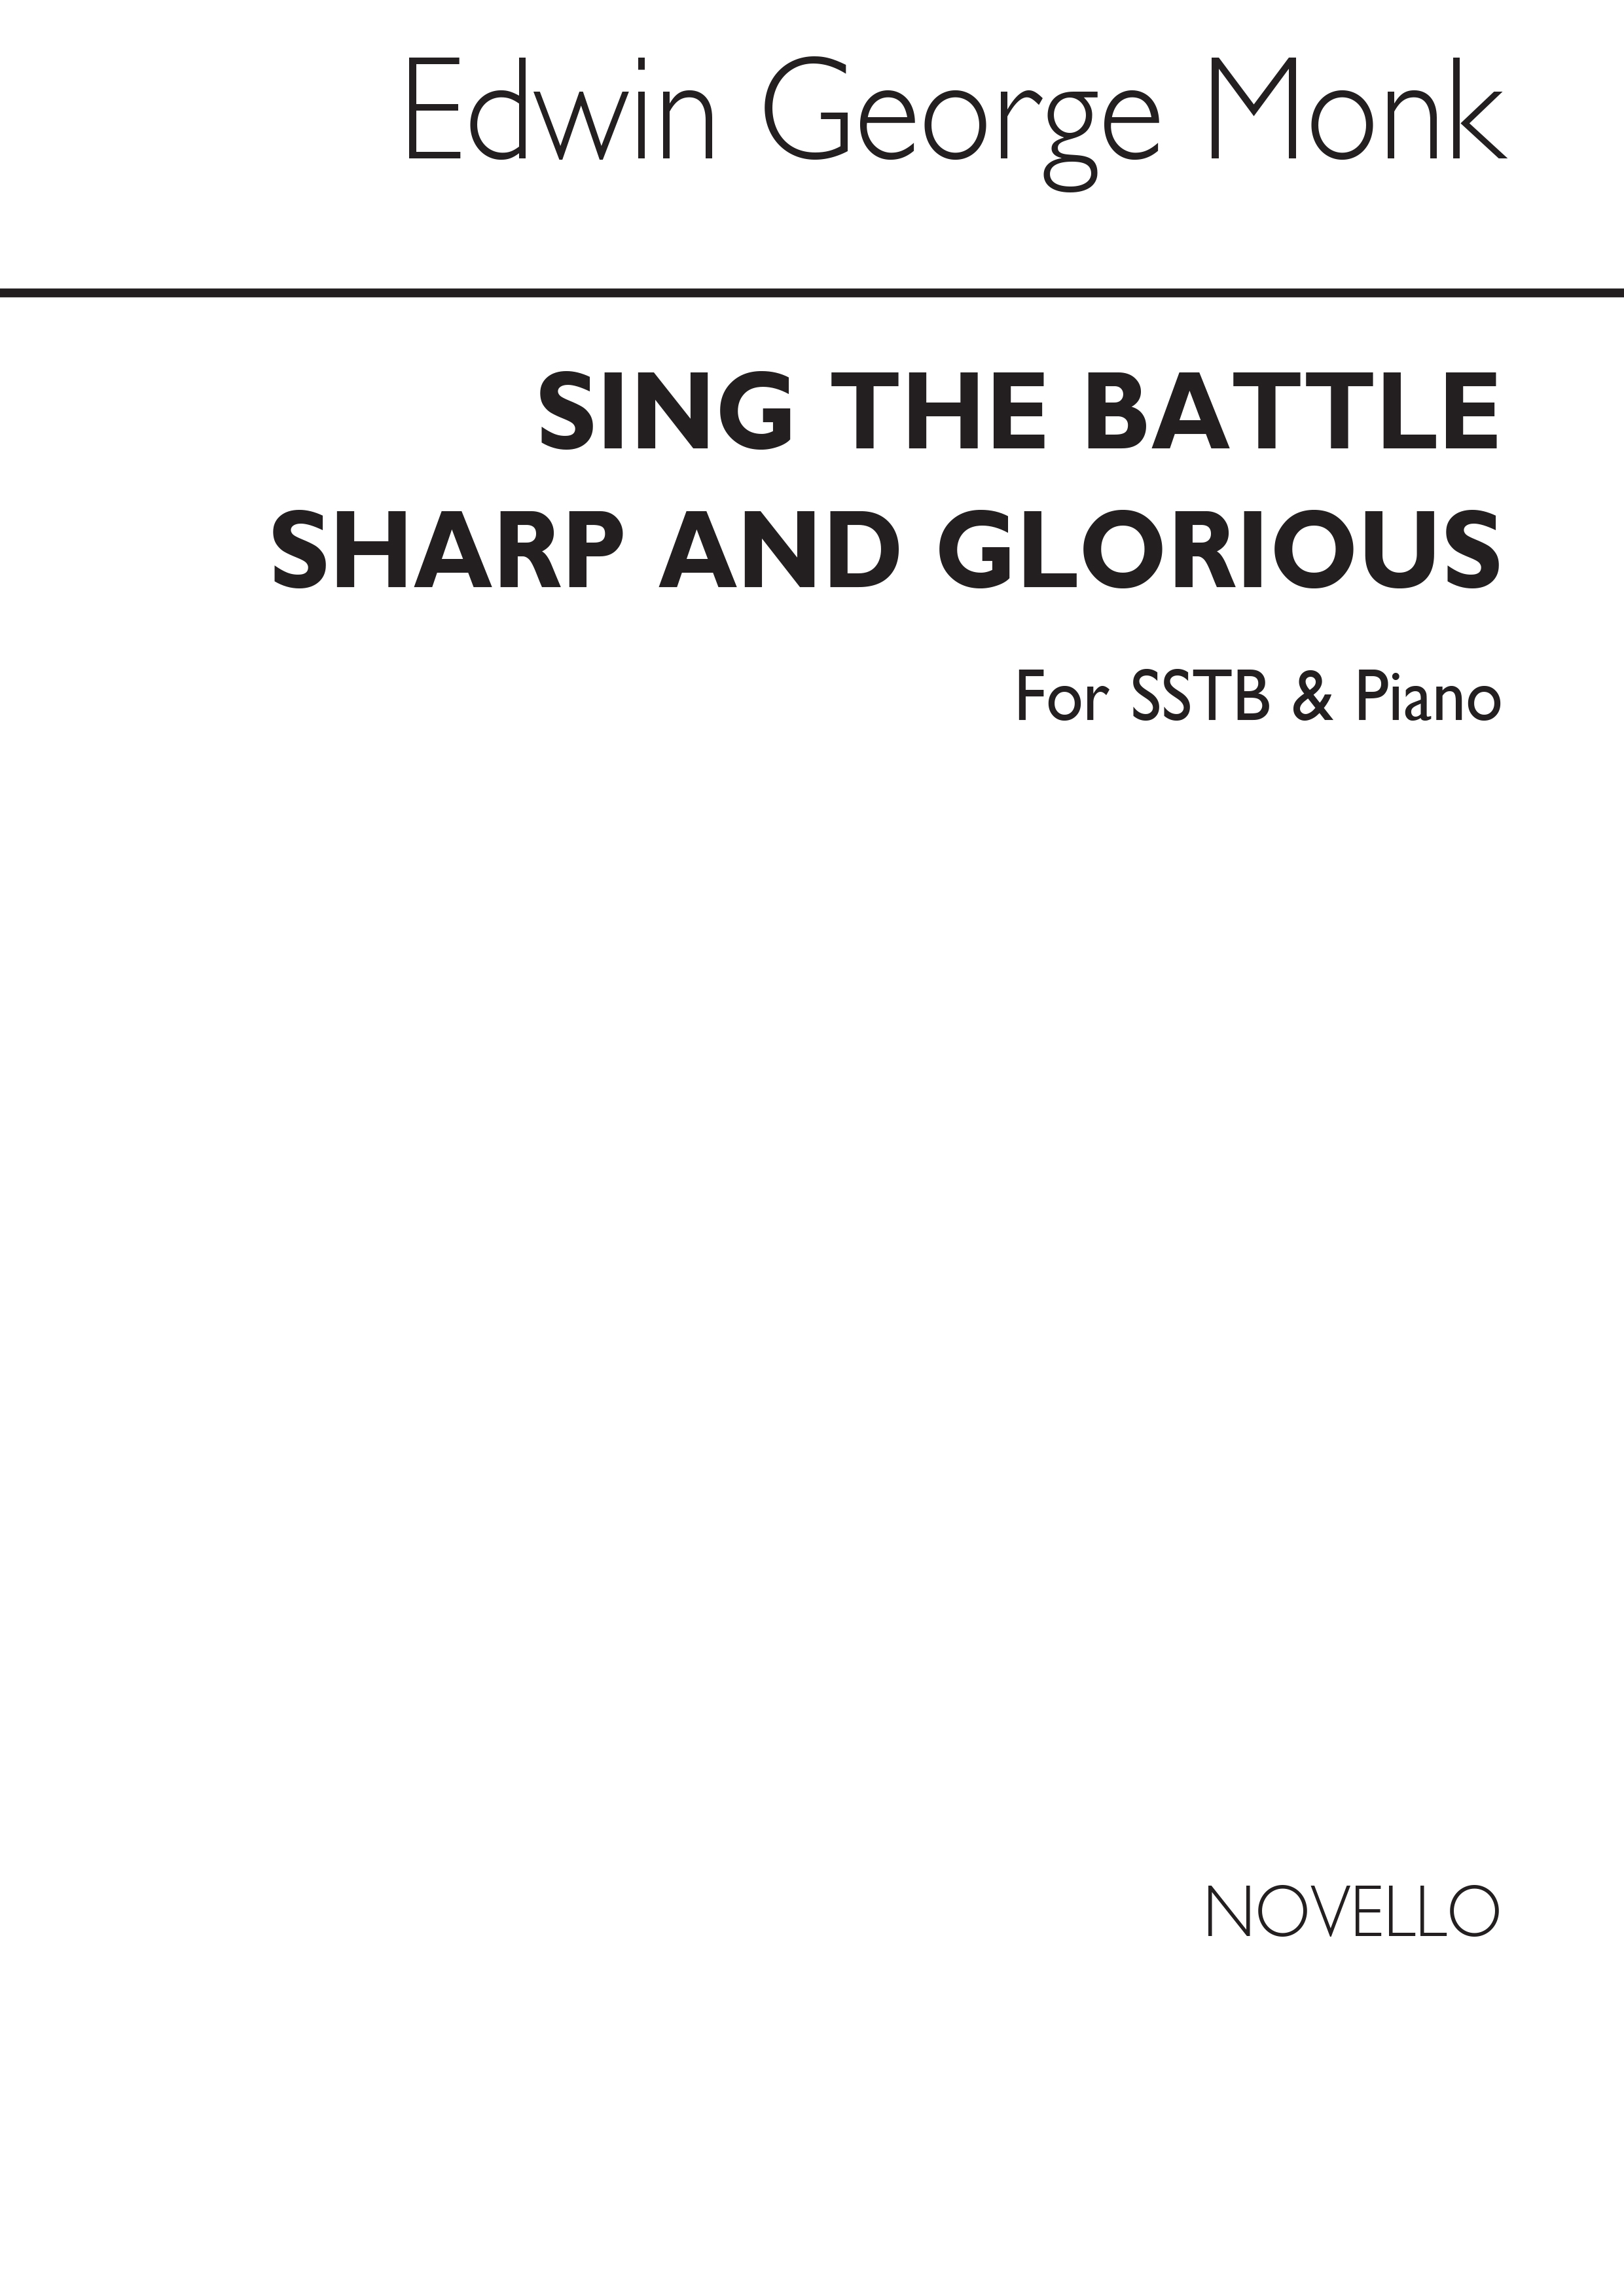 Edwin George Monk: Sing The Battle Sharp And Glorious Sstb/Piano